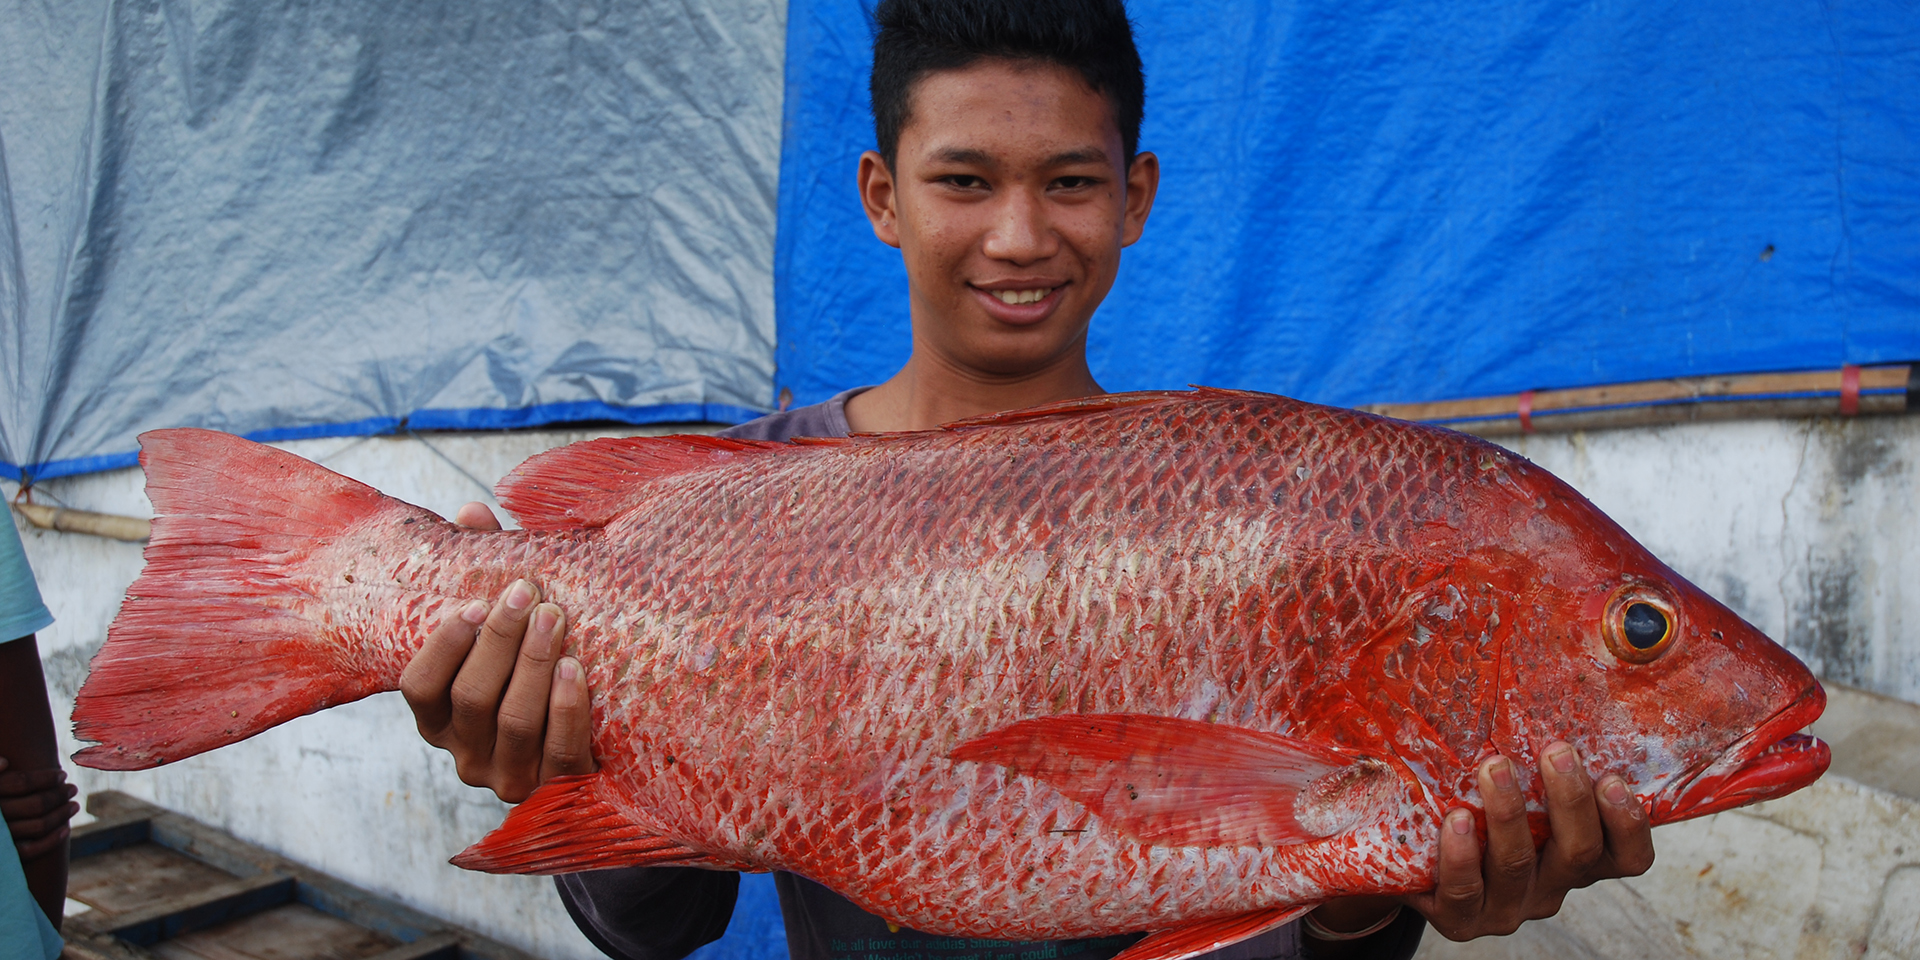 Image of a young man smiling and presenting a large red fish